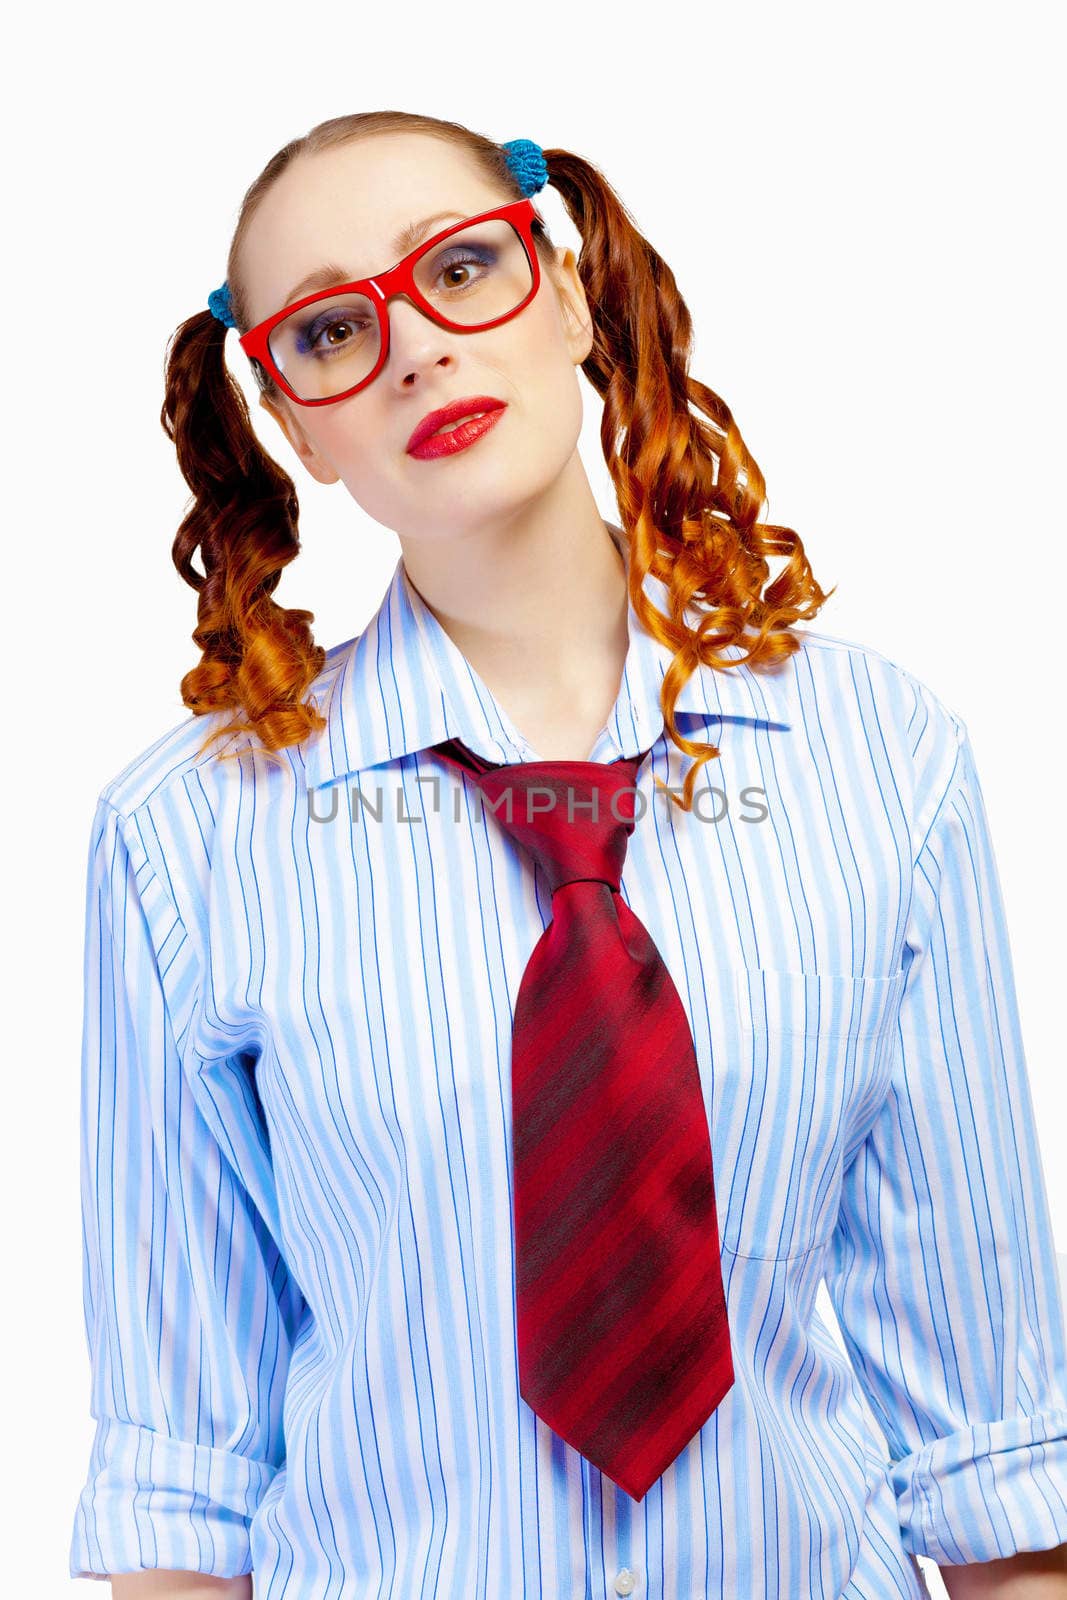 Teenager girl with pigtails in red glasses